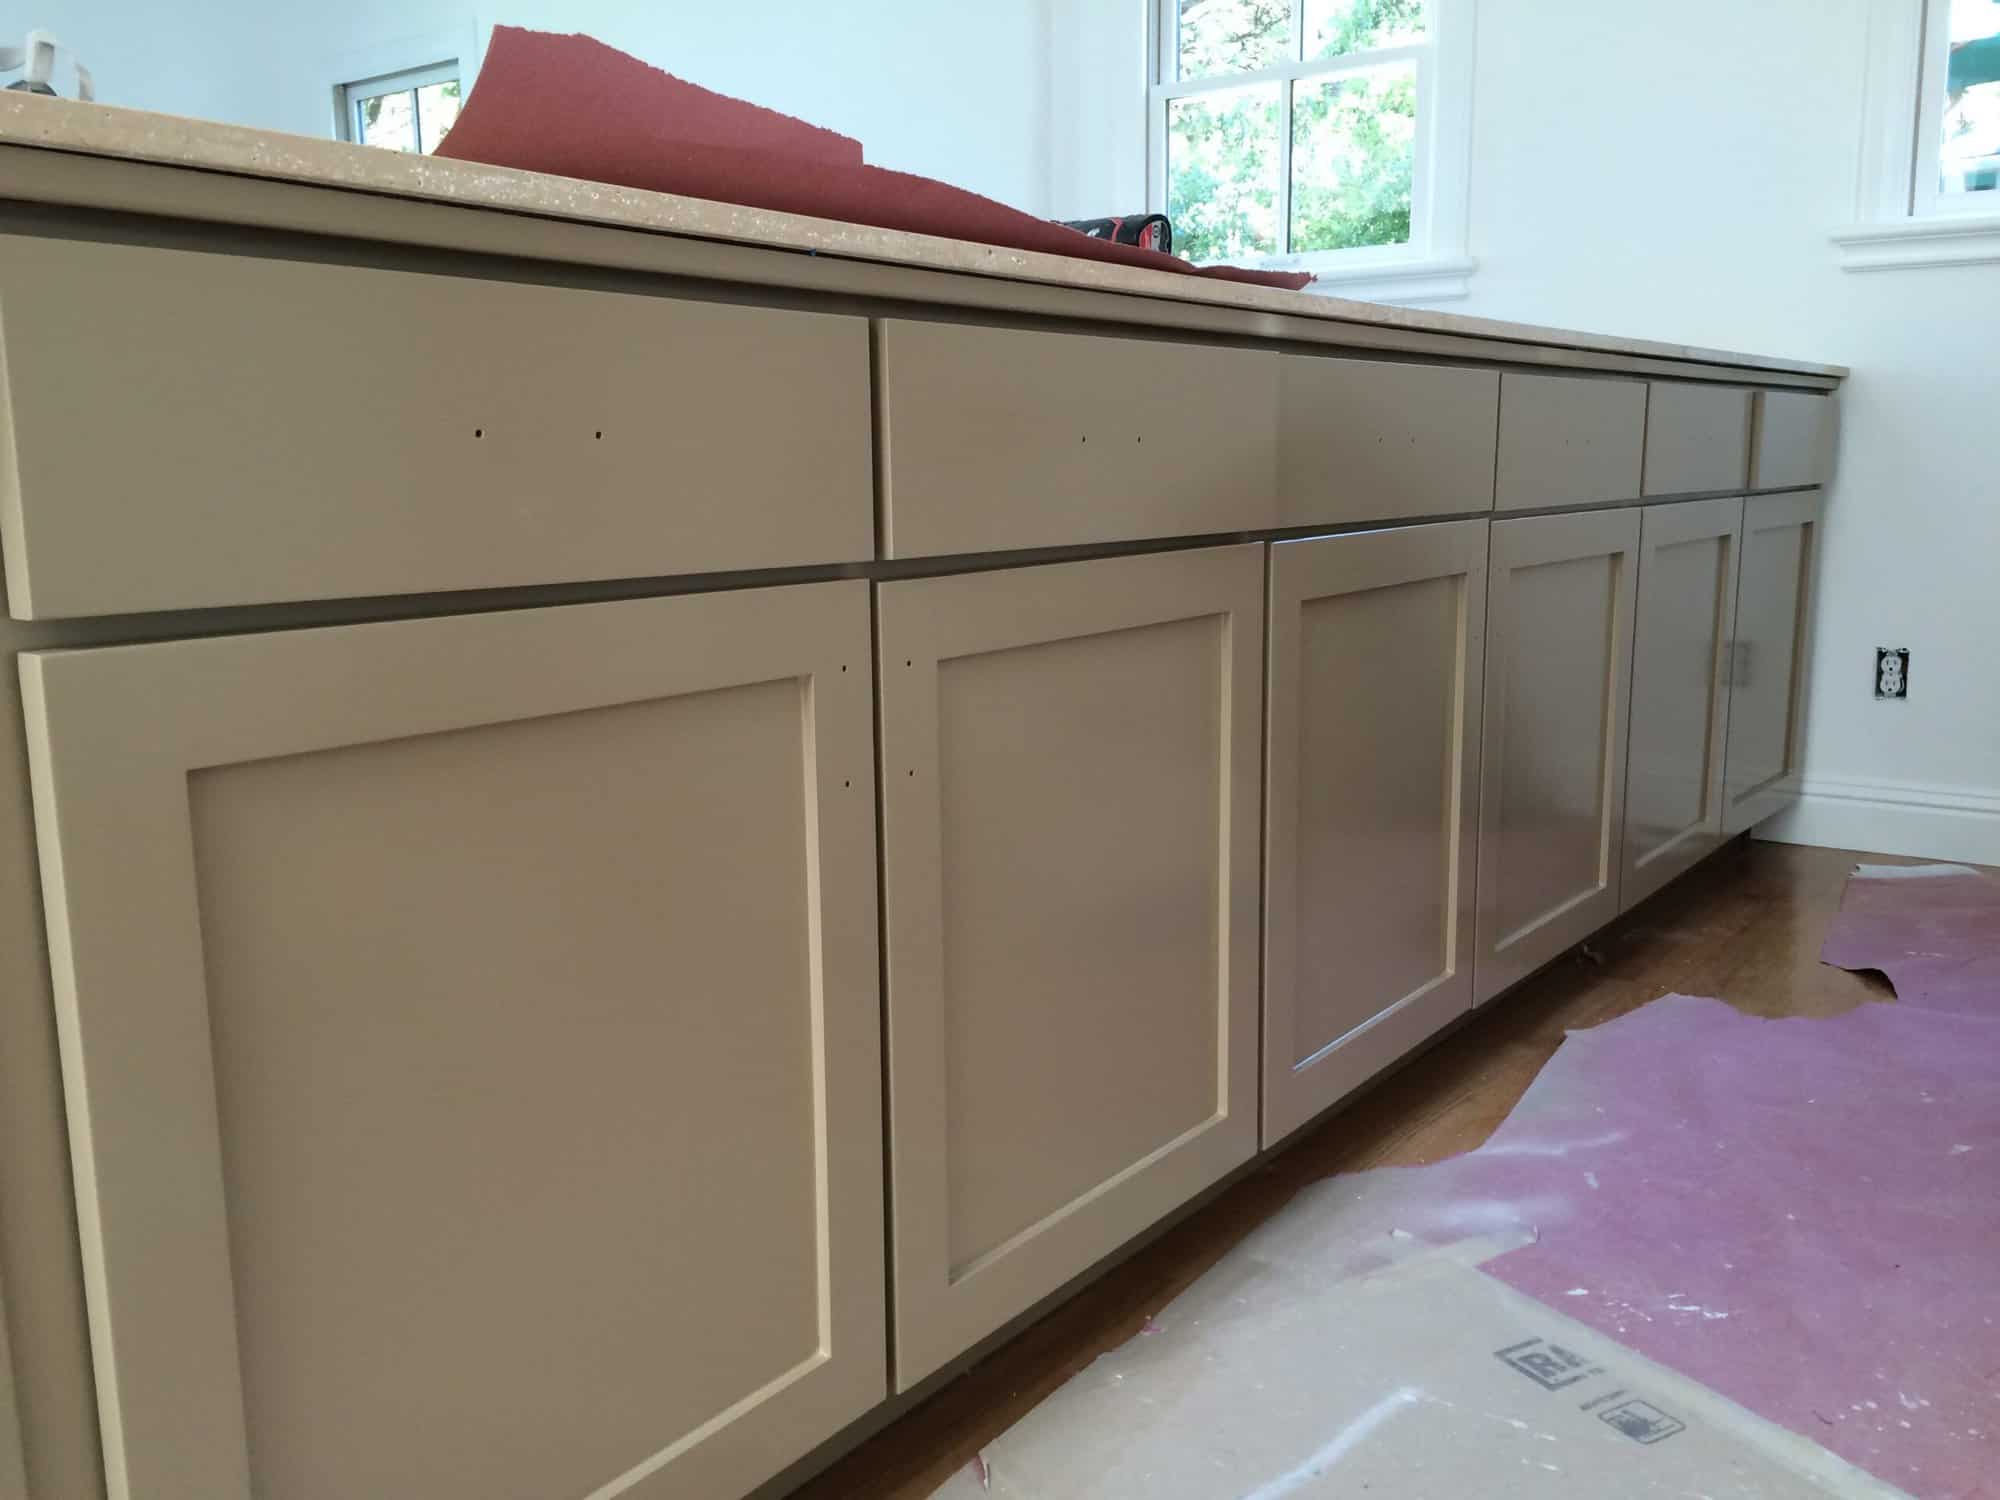 Cabinet Painting Services near you